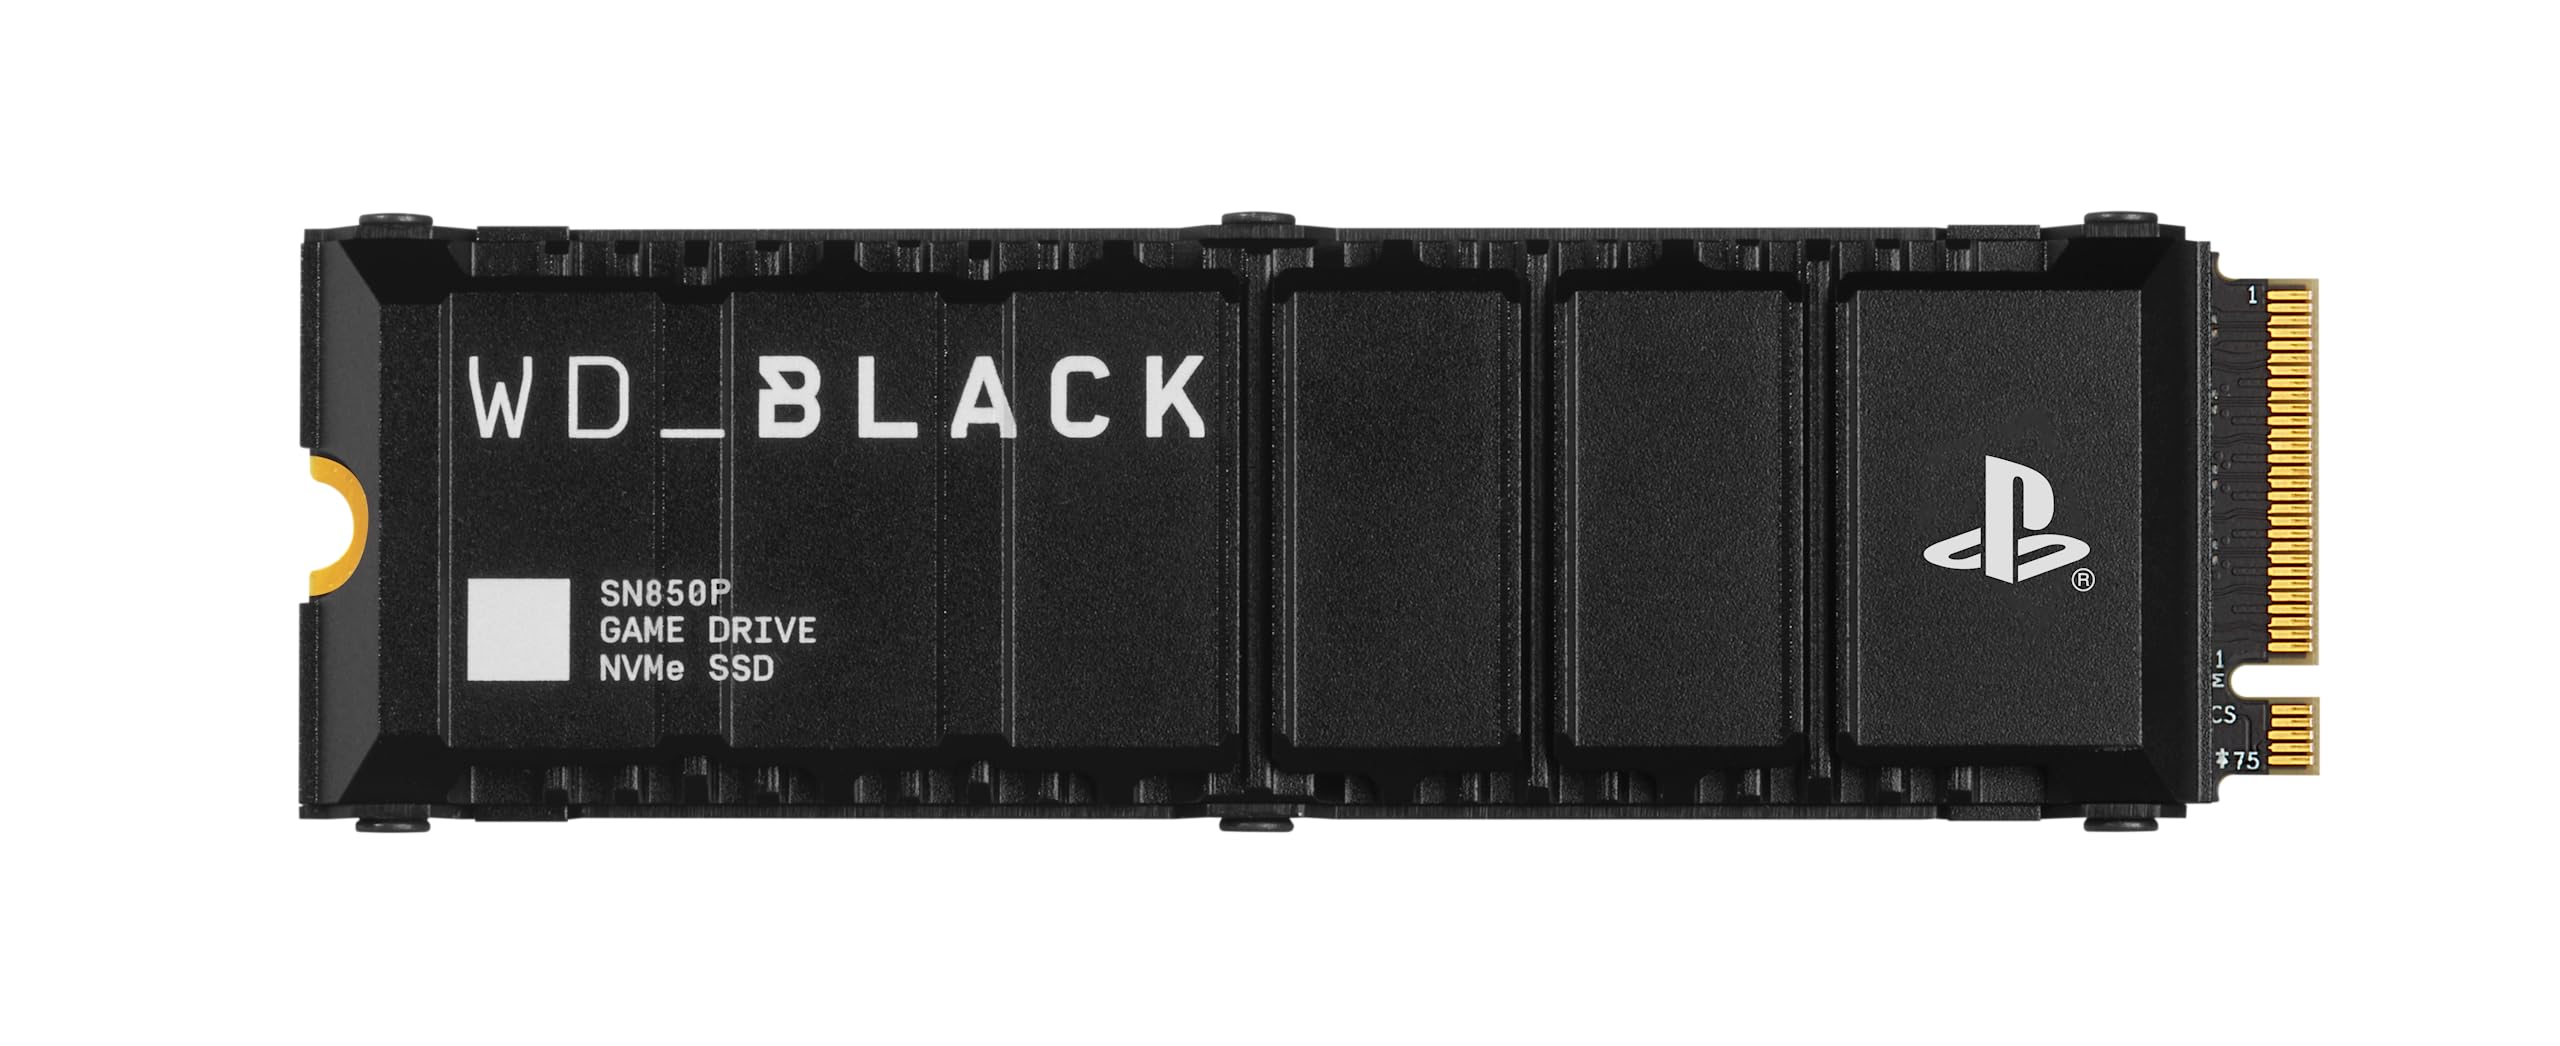 WD_BLACK 4TB SN850P NVMe M.2 SSD Officially Licensed Storage Expansion for PS5 Consoles, up to 7,300MB/s, with heatsink - WDBBYV0040BNC-WRSN